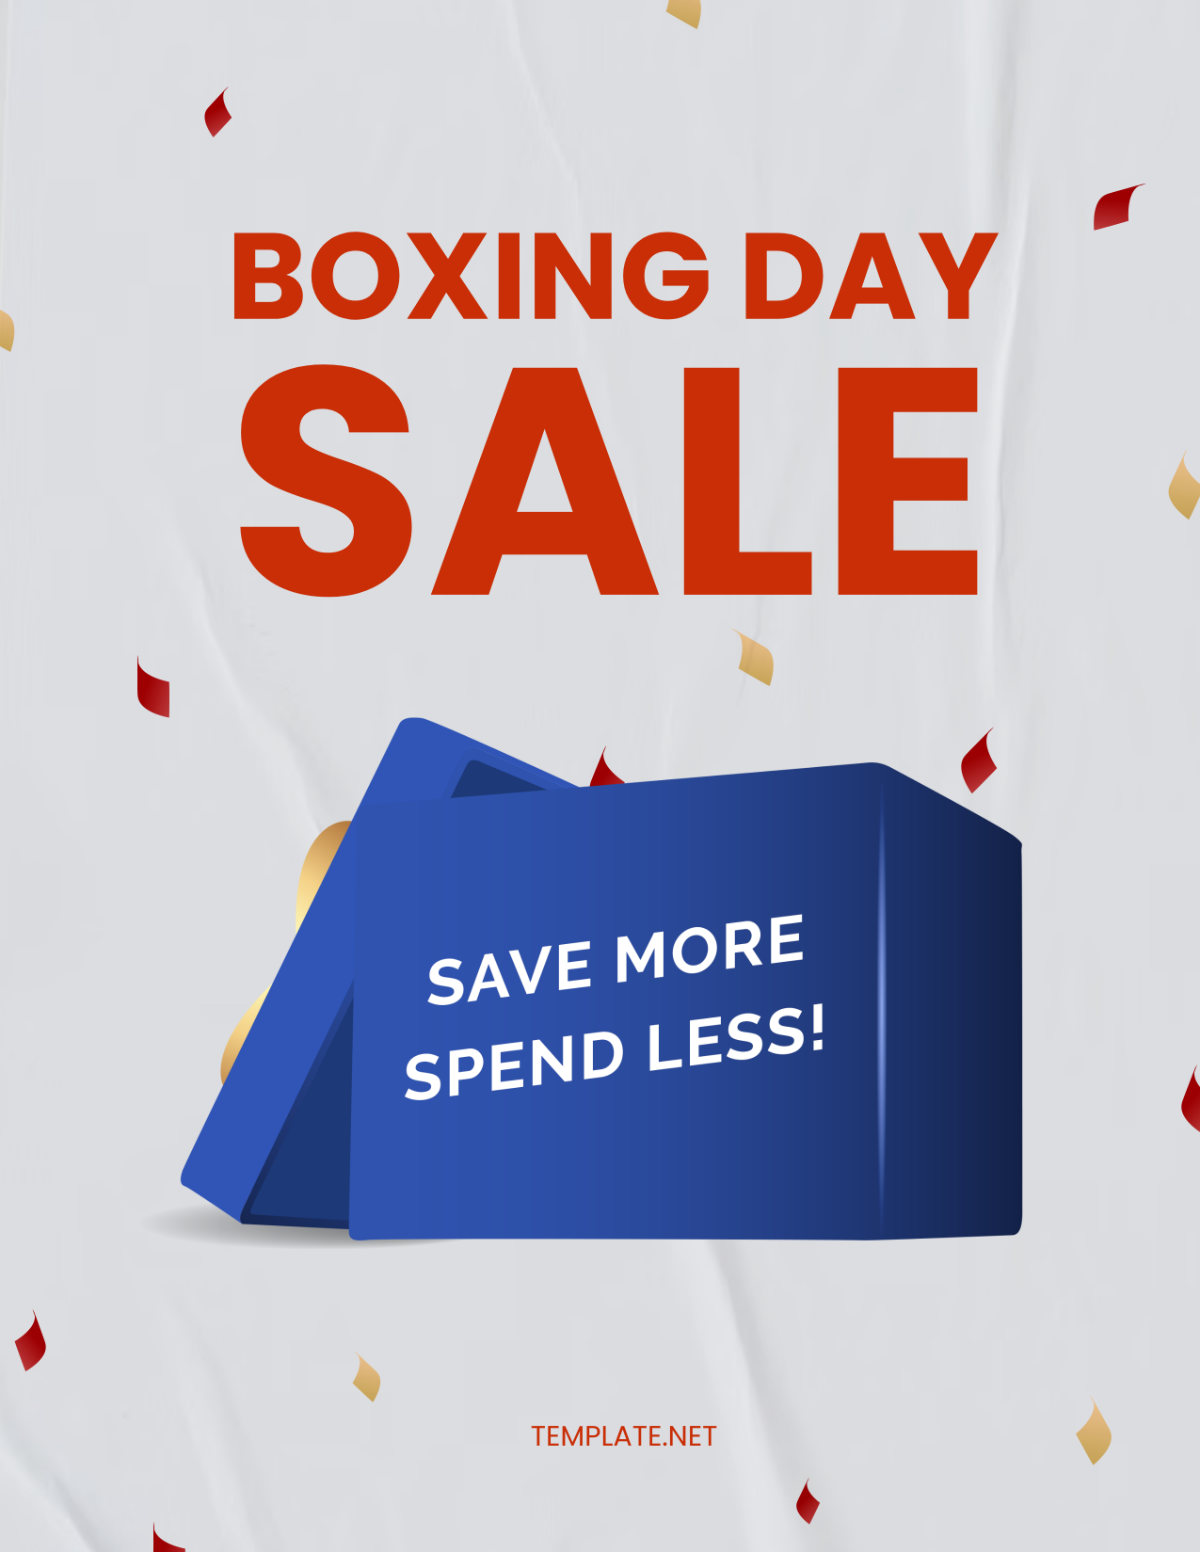 Upcoming Boxing Day Sale